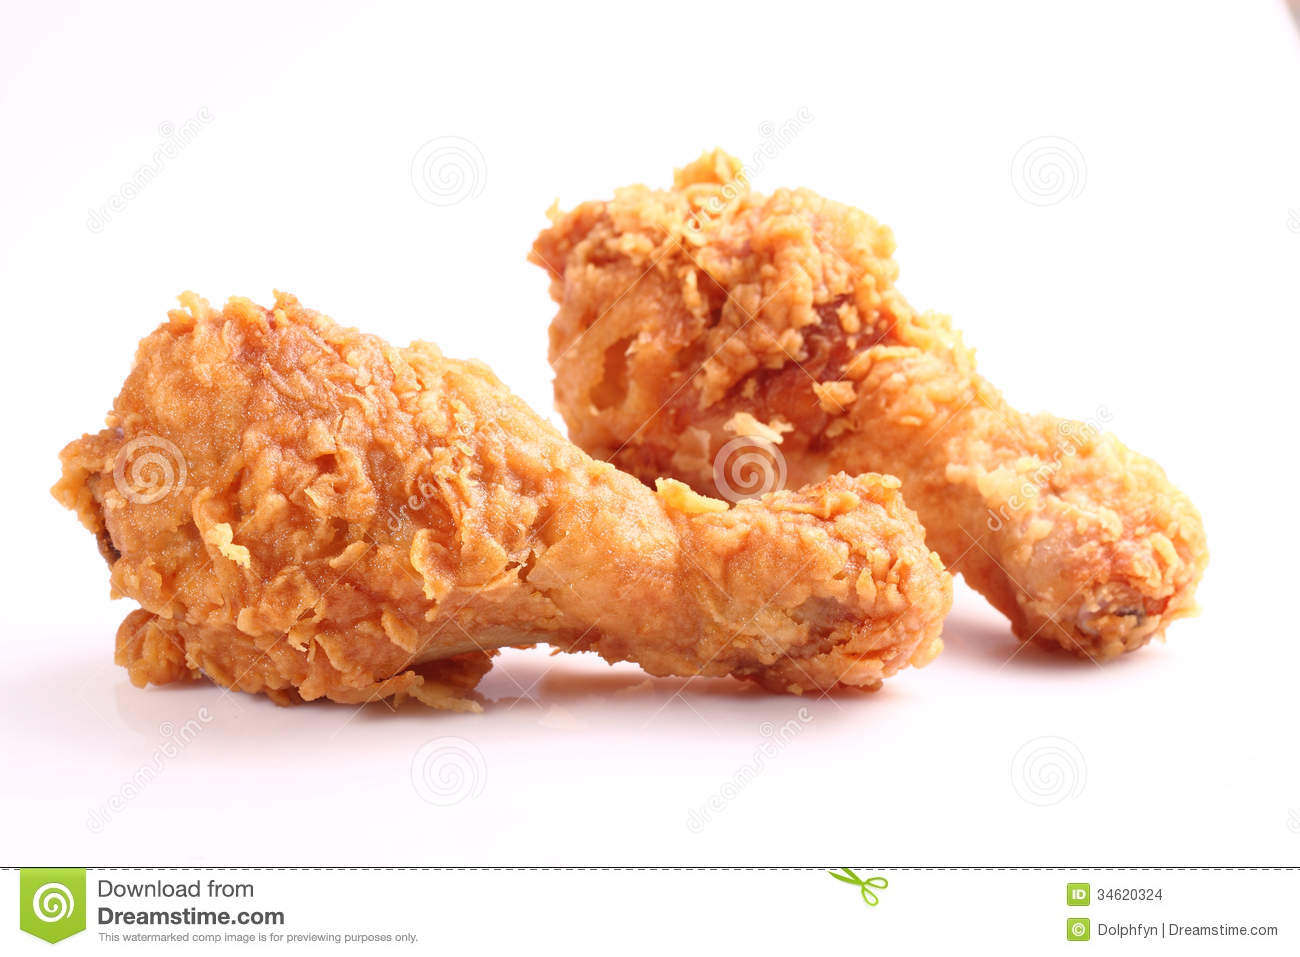 Two Hot And Crispy Fried Chicken Legs On A White Background 